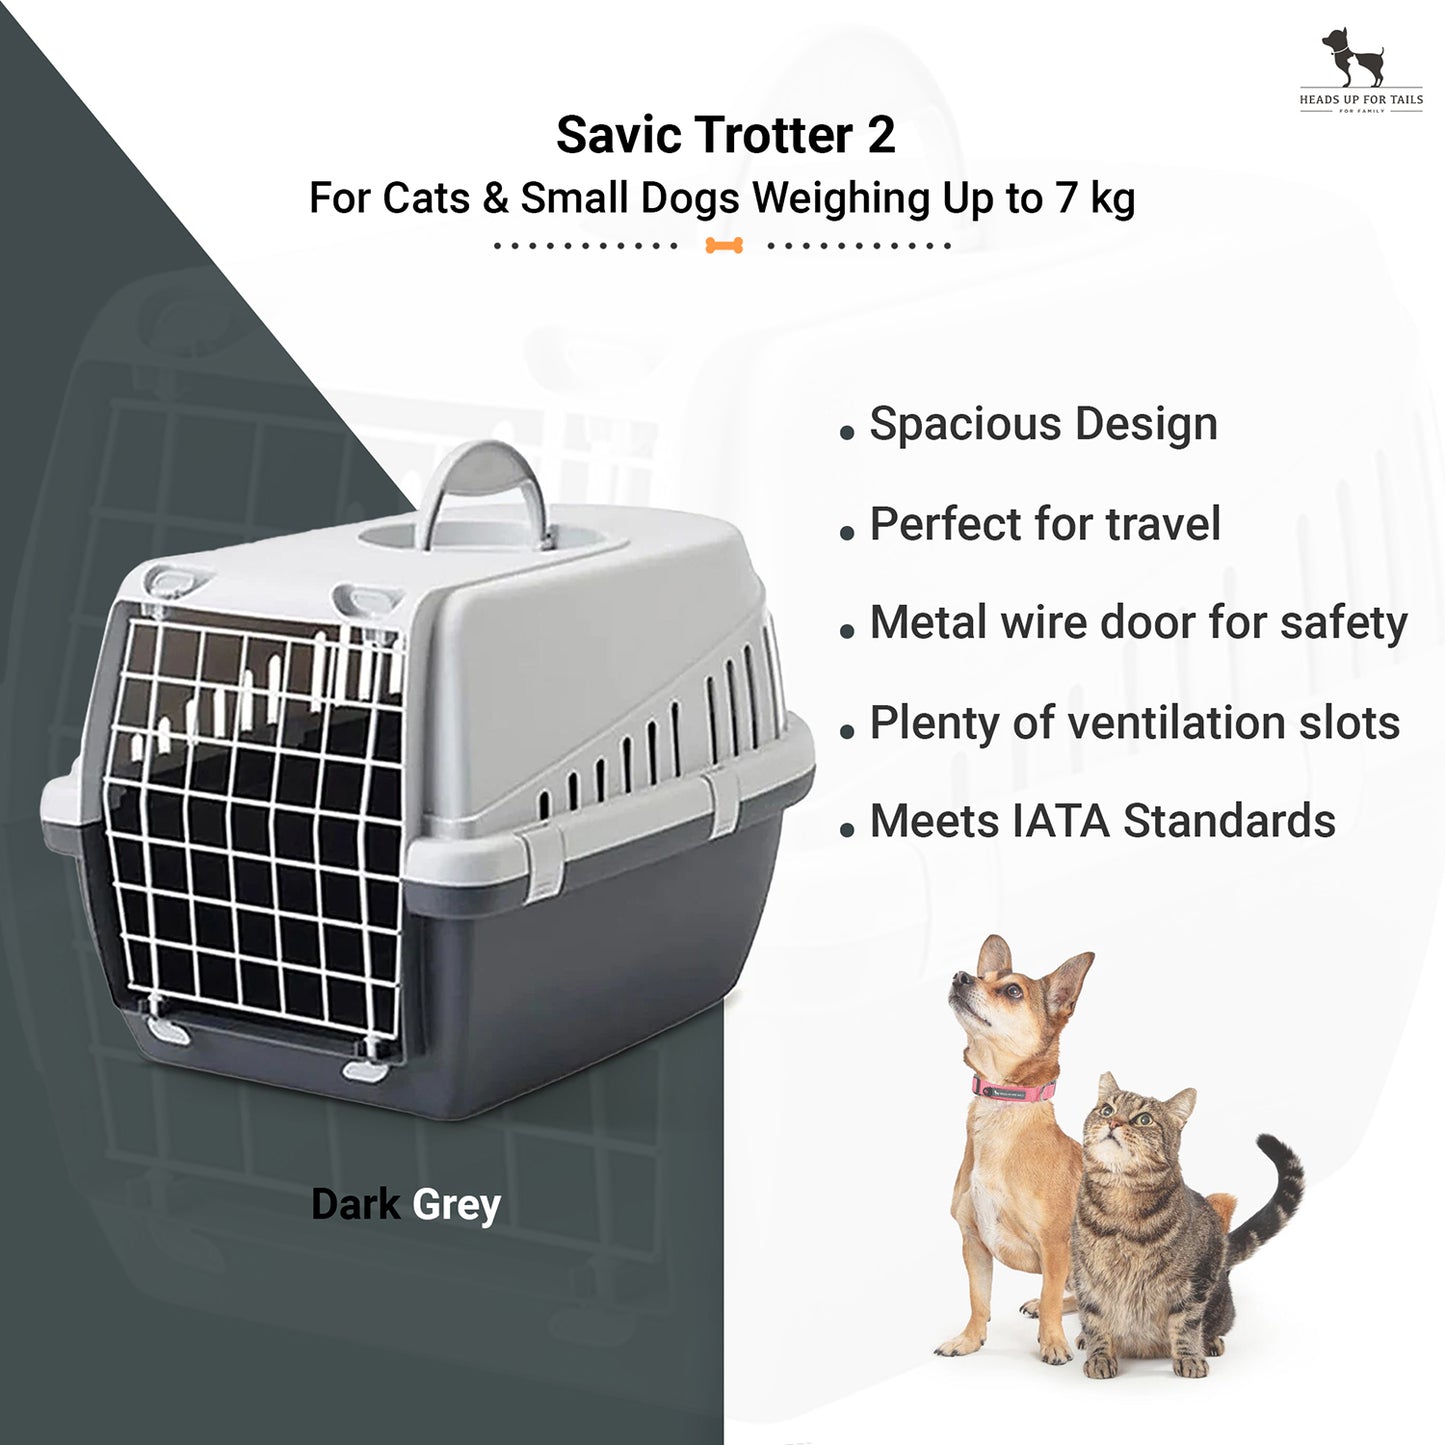 Savic Trotter 2 - Dog & Cat Carrier - Dark Grey - 22 x 15 x 13 inch - Holds up to 7 kg_02